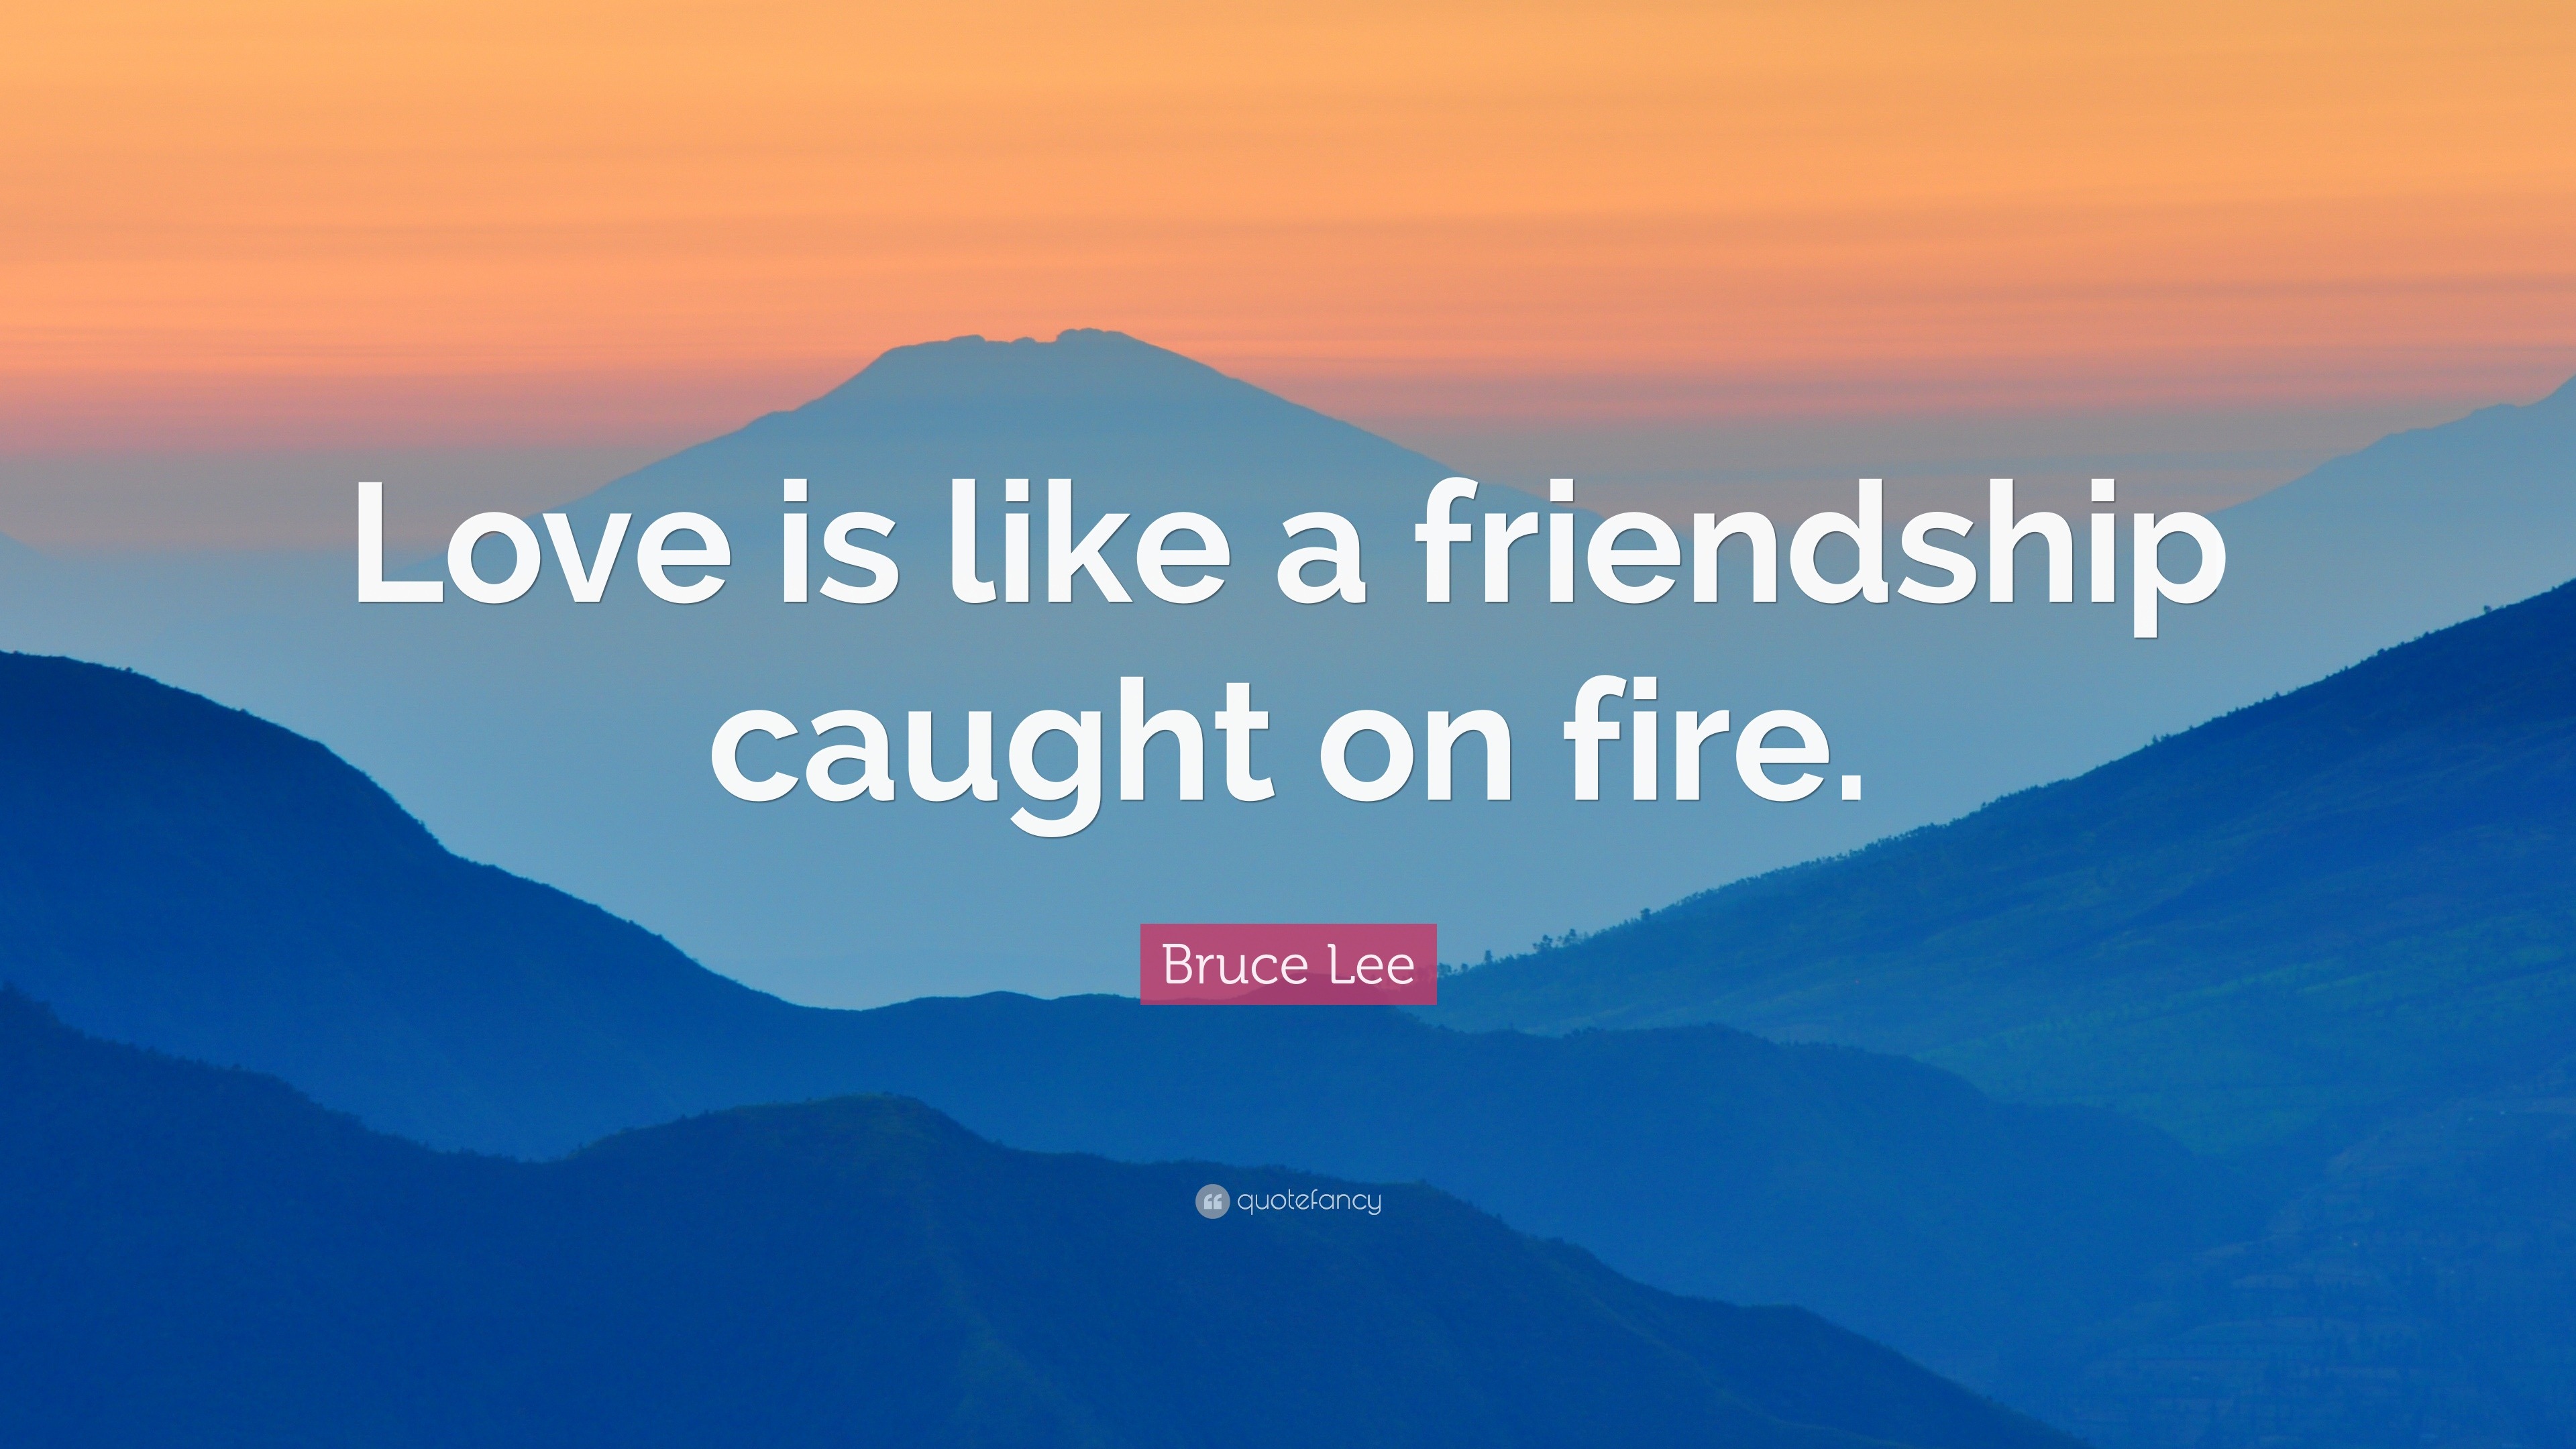 Bruce Lee Quote “Love is like a friendship caught on fire ”